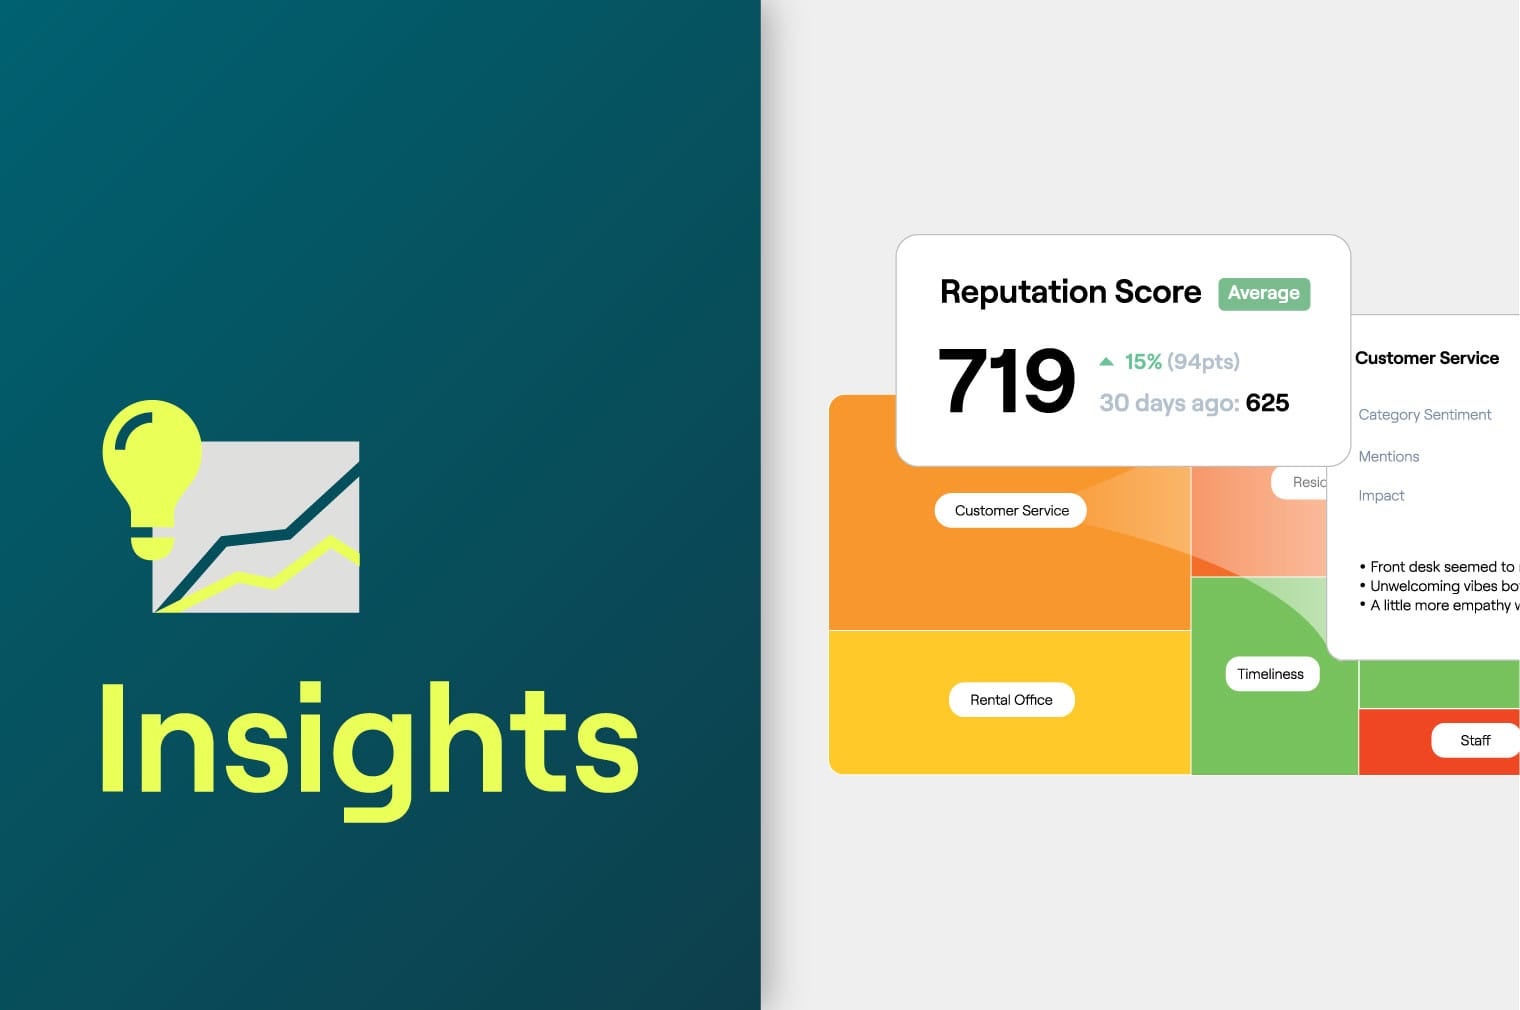 Image for Introducing Insights by Reputation